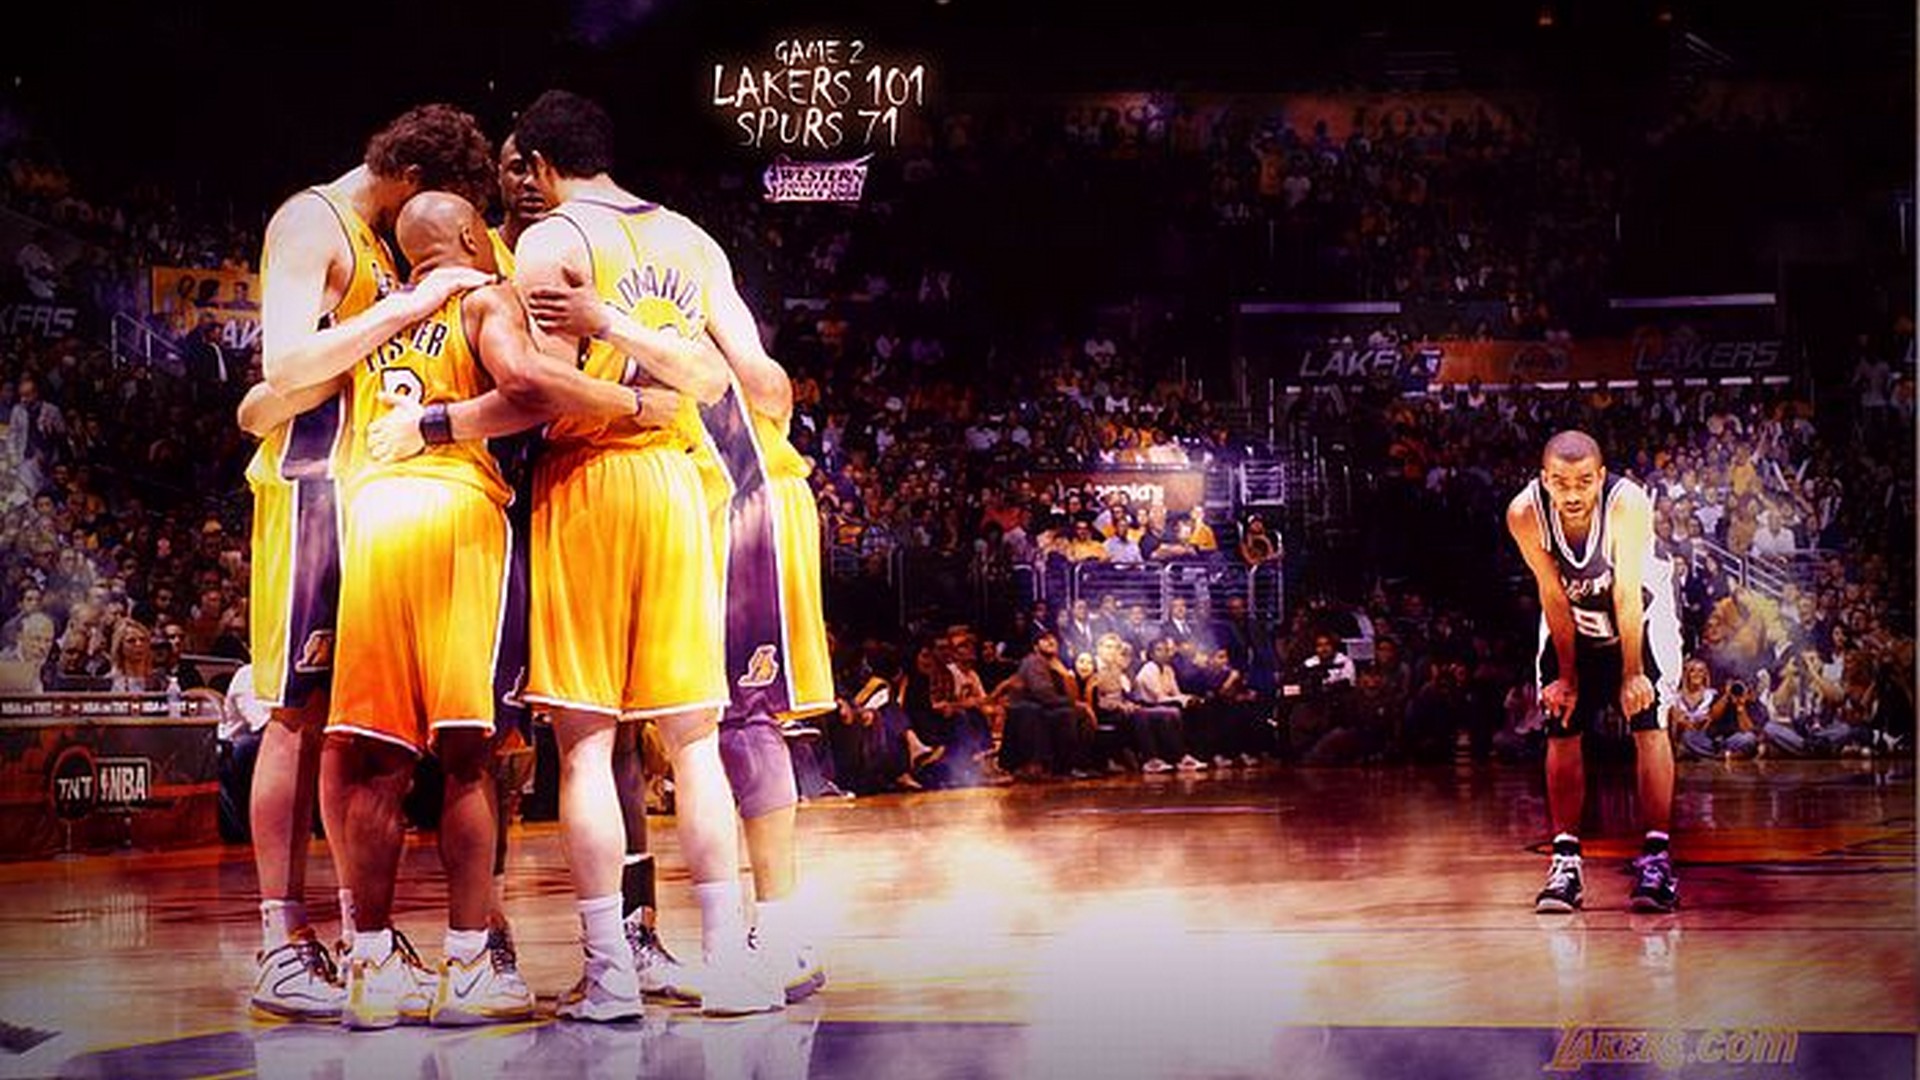 HD Los Angeles Lakers Backgrounds with image dimensions 1920x1080 pixel. You can make this wallpaper for your Desktop Computer Backgrounds, Windows or Mac Screensavers, iPhone Lock screen, Tablet or Android and another Mobile Phone device